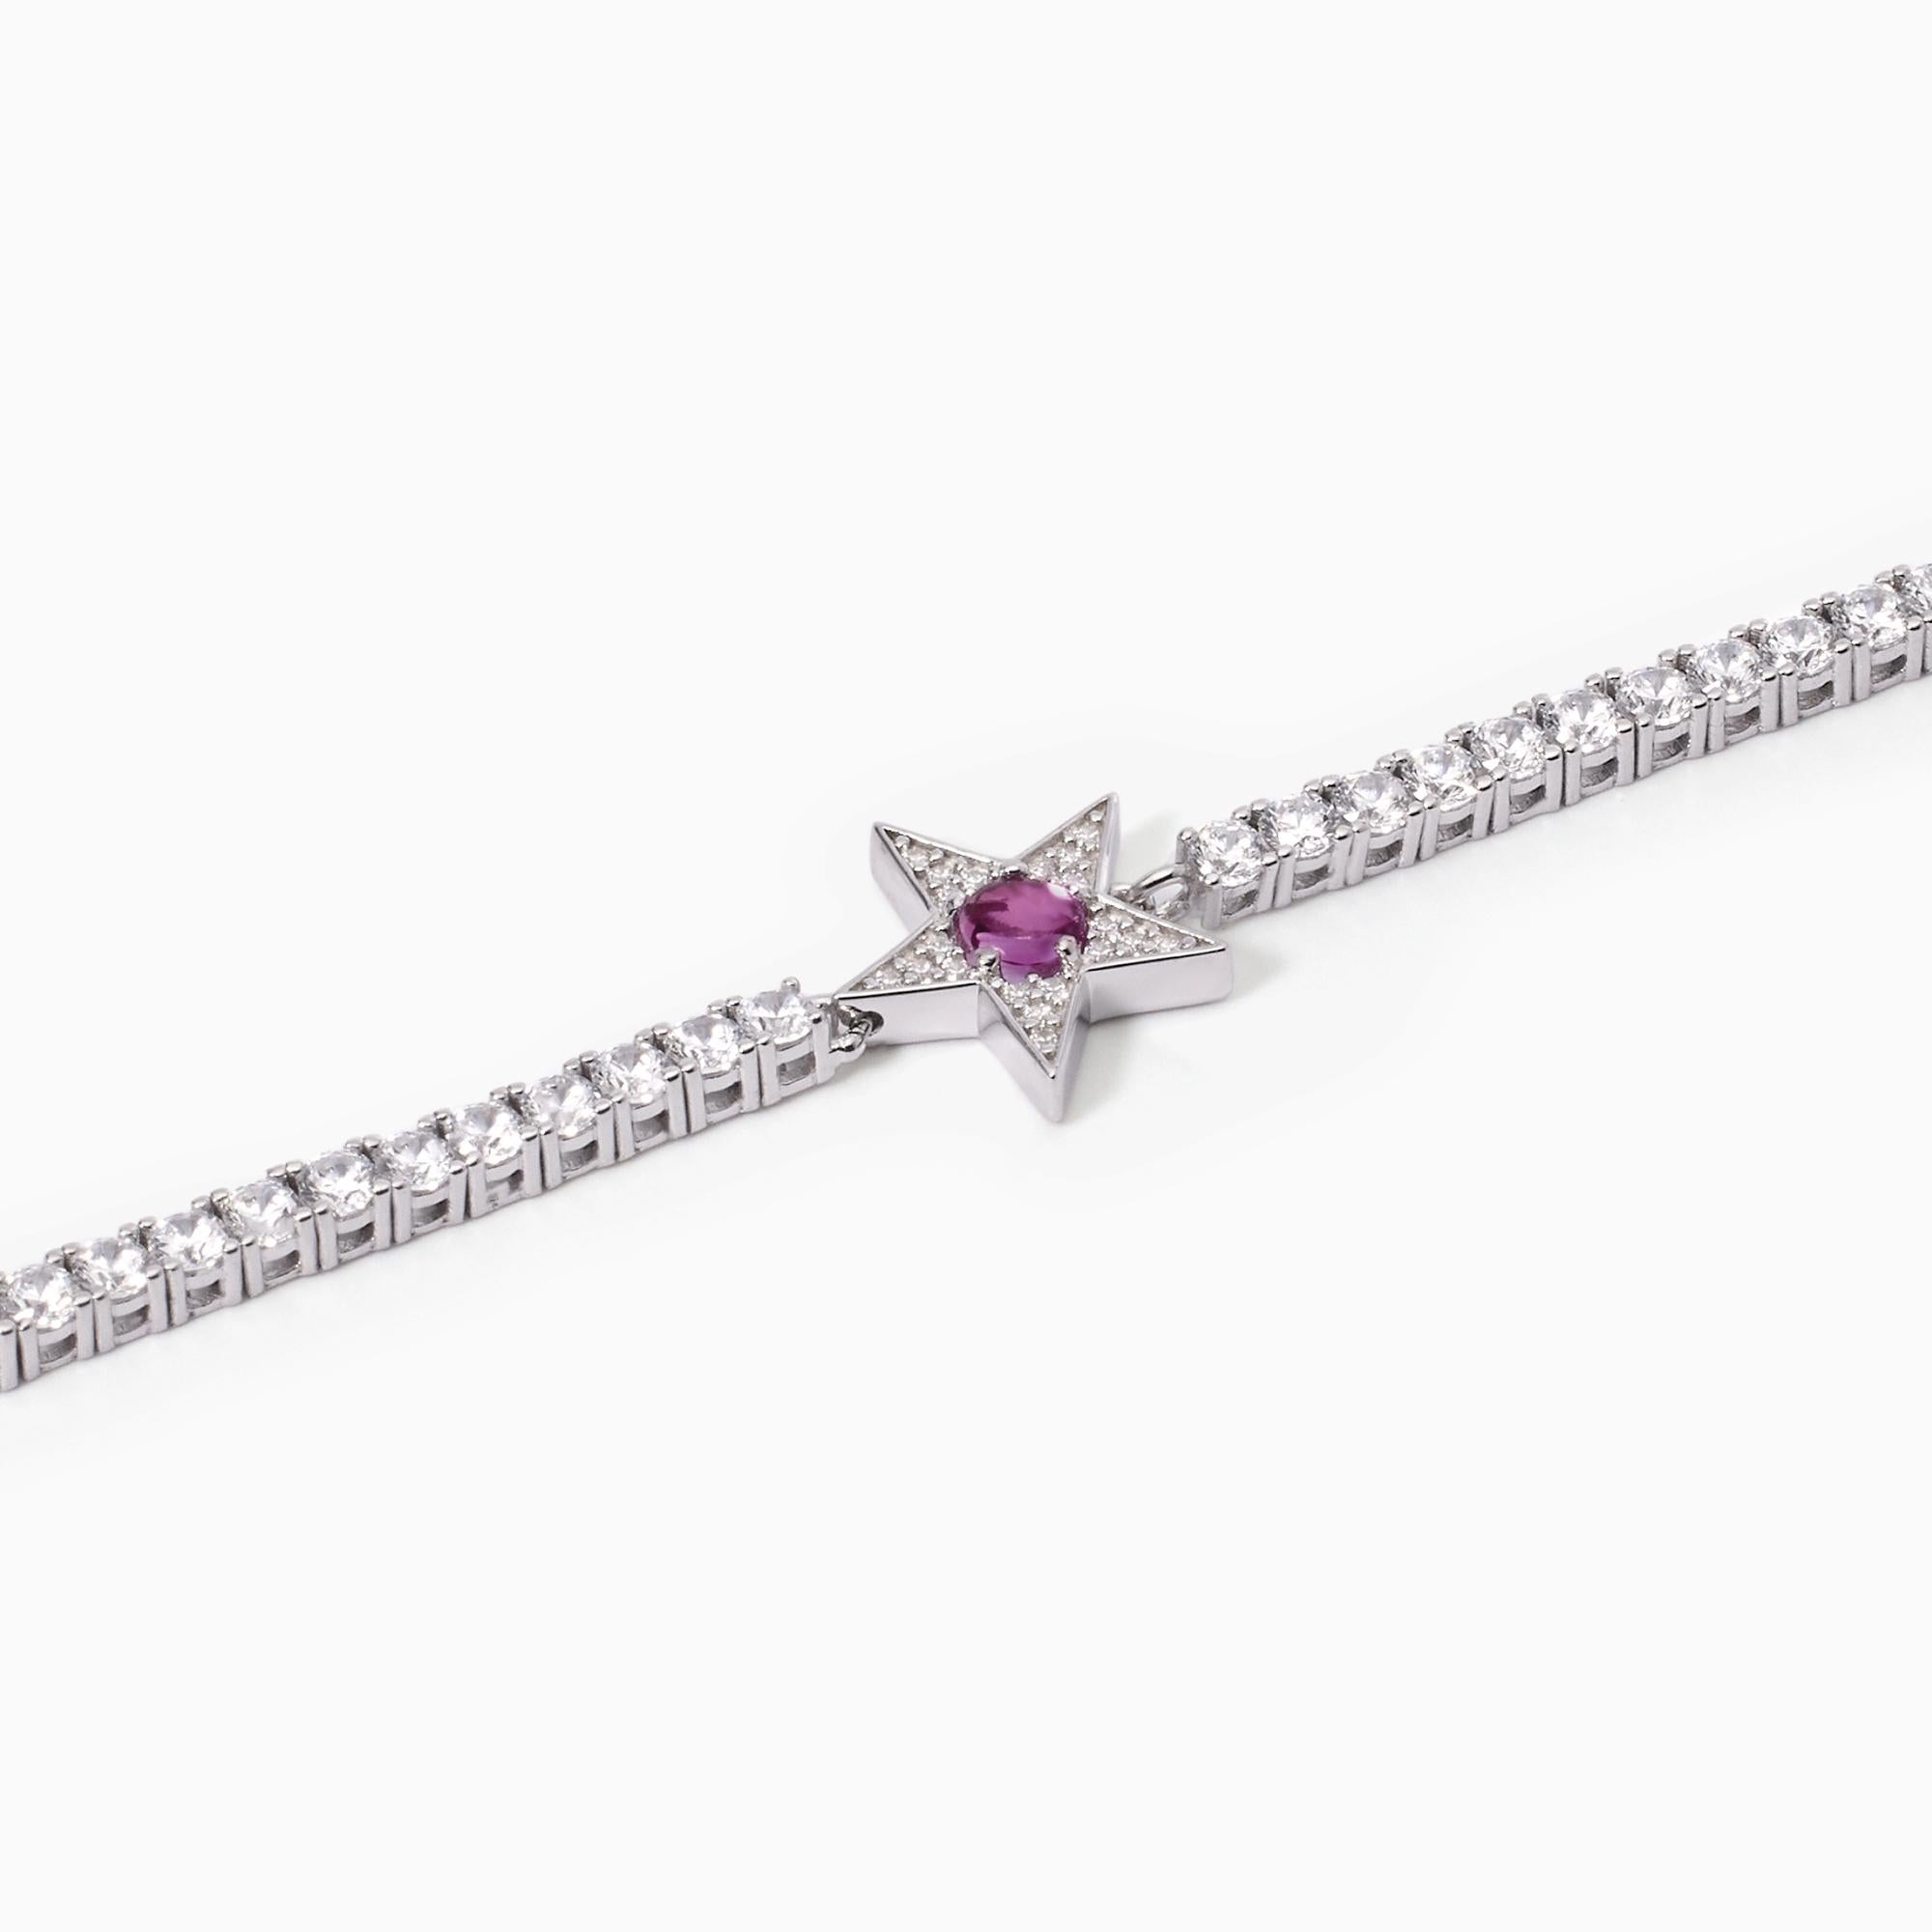 Mabina Woman - Star tennis bracelet with synthetic tourmaline STARLET - 533650-S